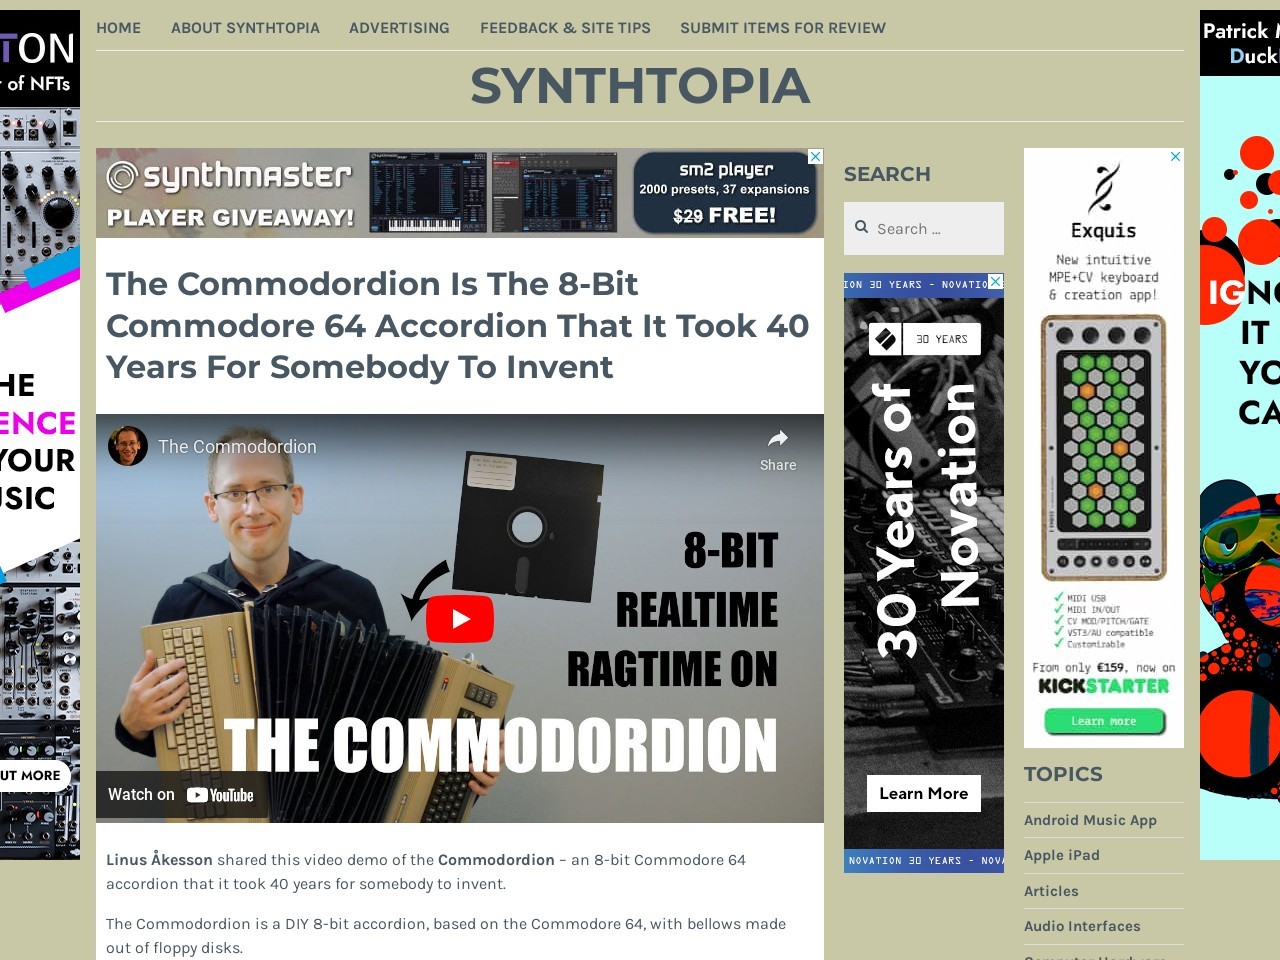 The Commodordion Is The 8-Bit Commodore 64 Accordion That It Took 40 Years For Somebody To Invent – Synthtopia